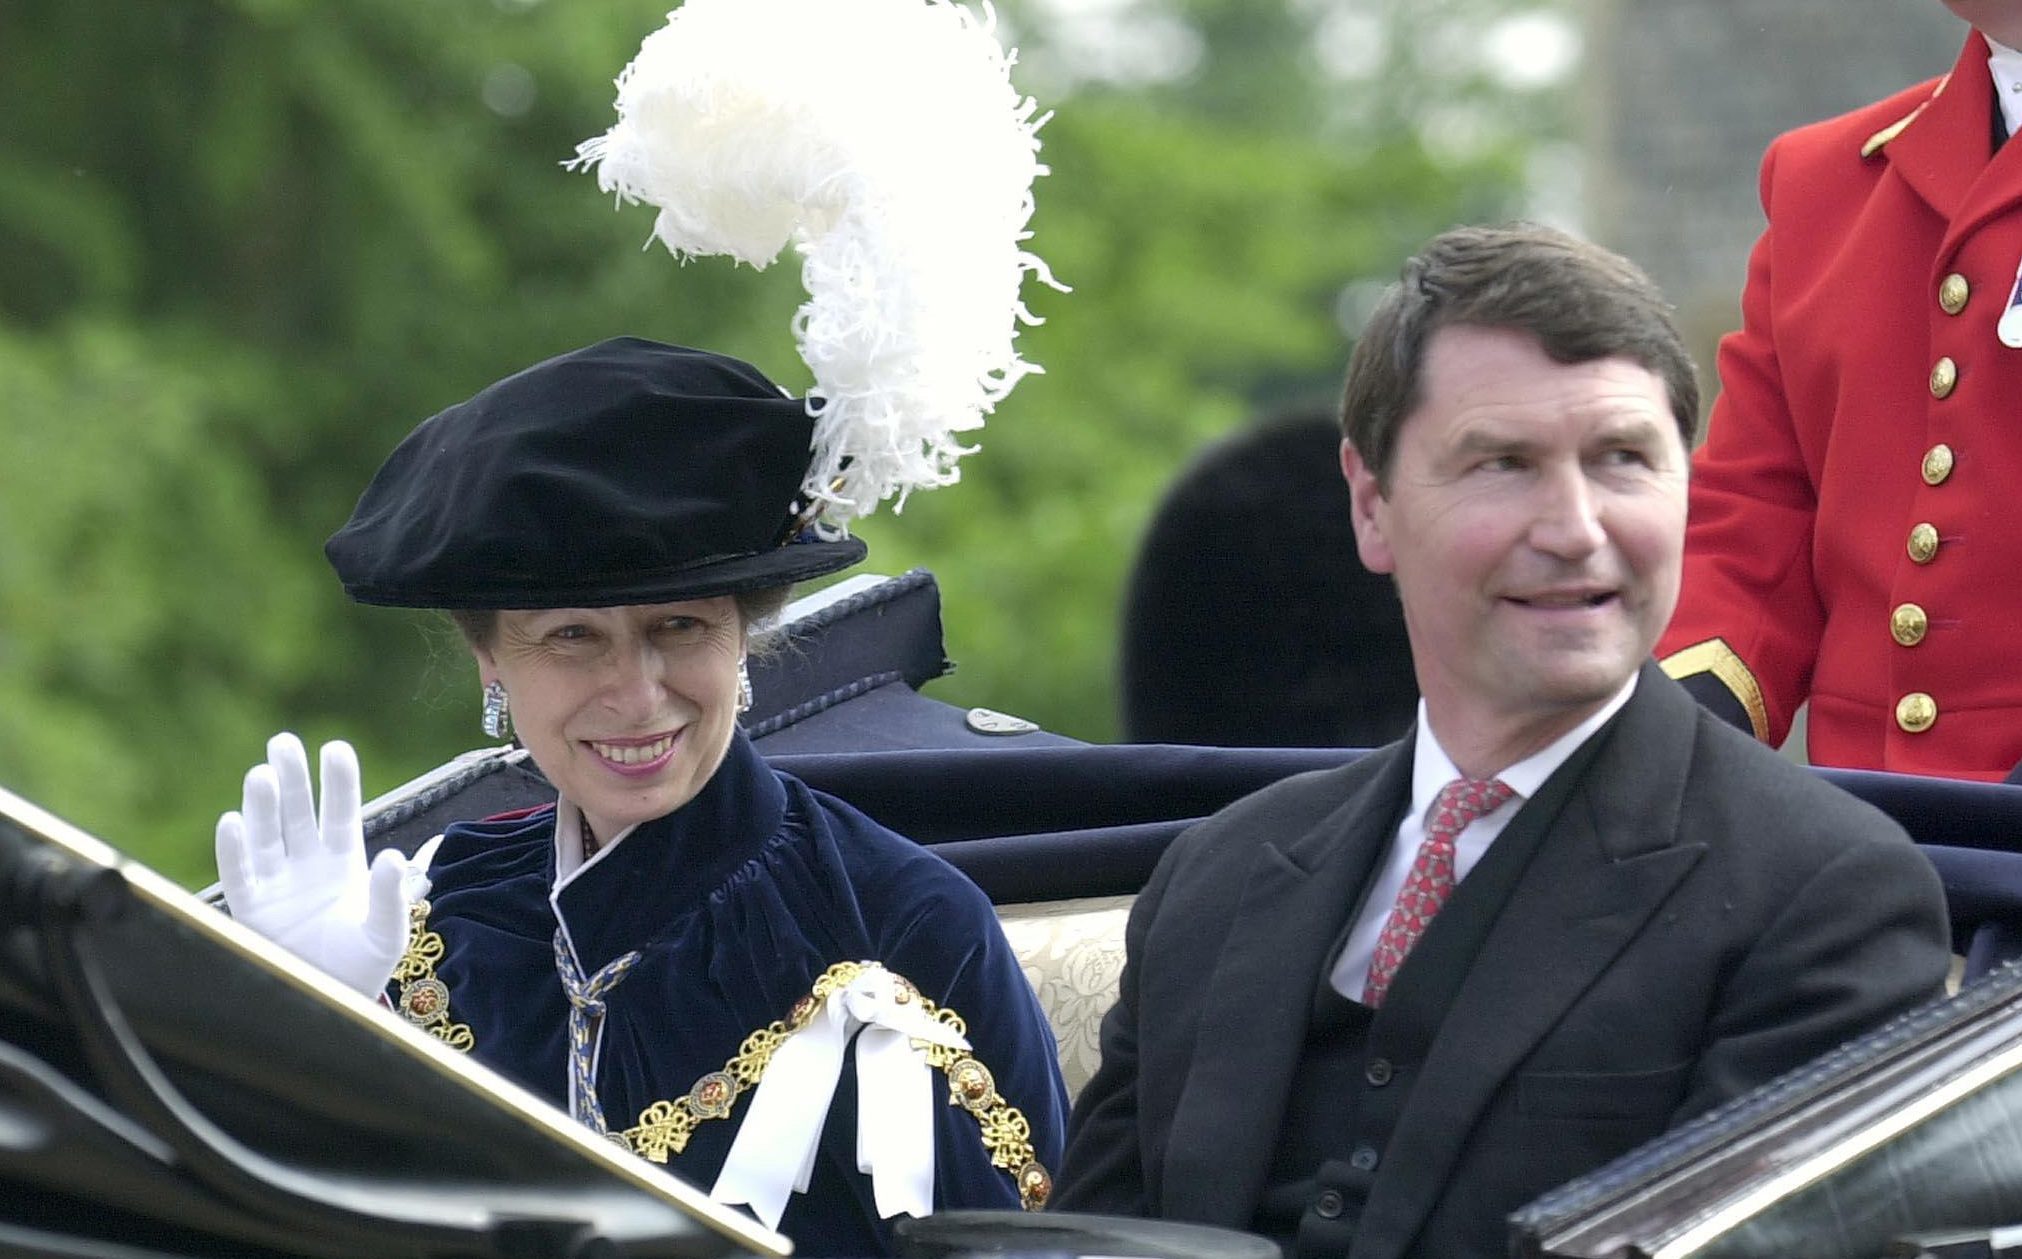 Princess Anne S Husband Sir Tim Laurence Remains The Quiet Man Of The Royal Family The Sunday Post